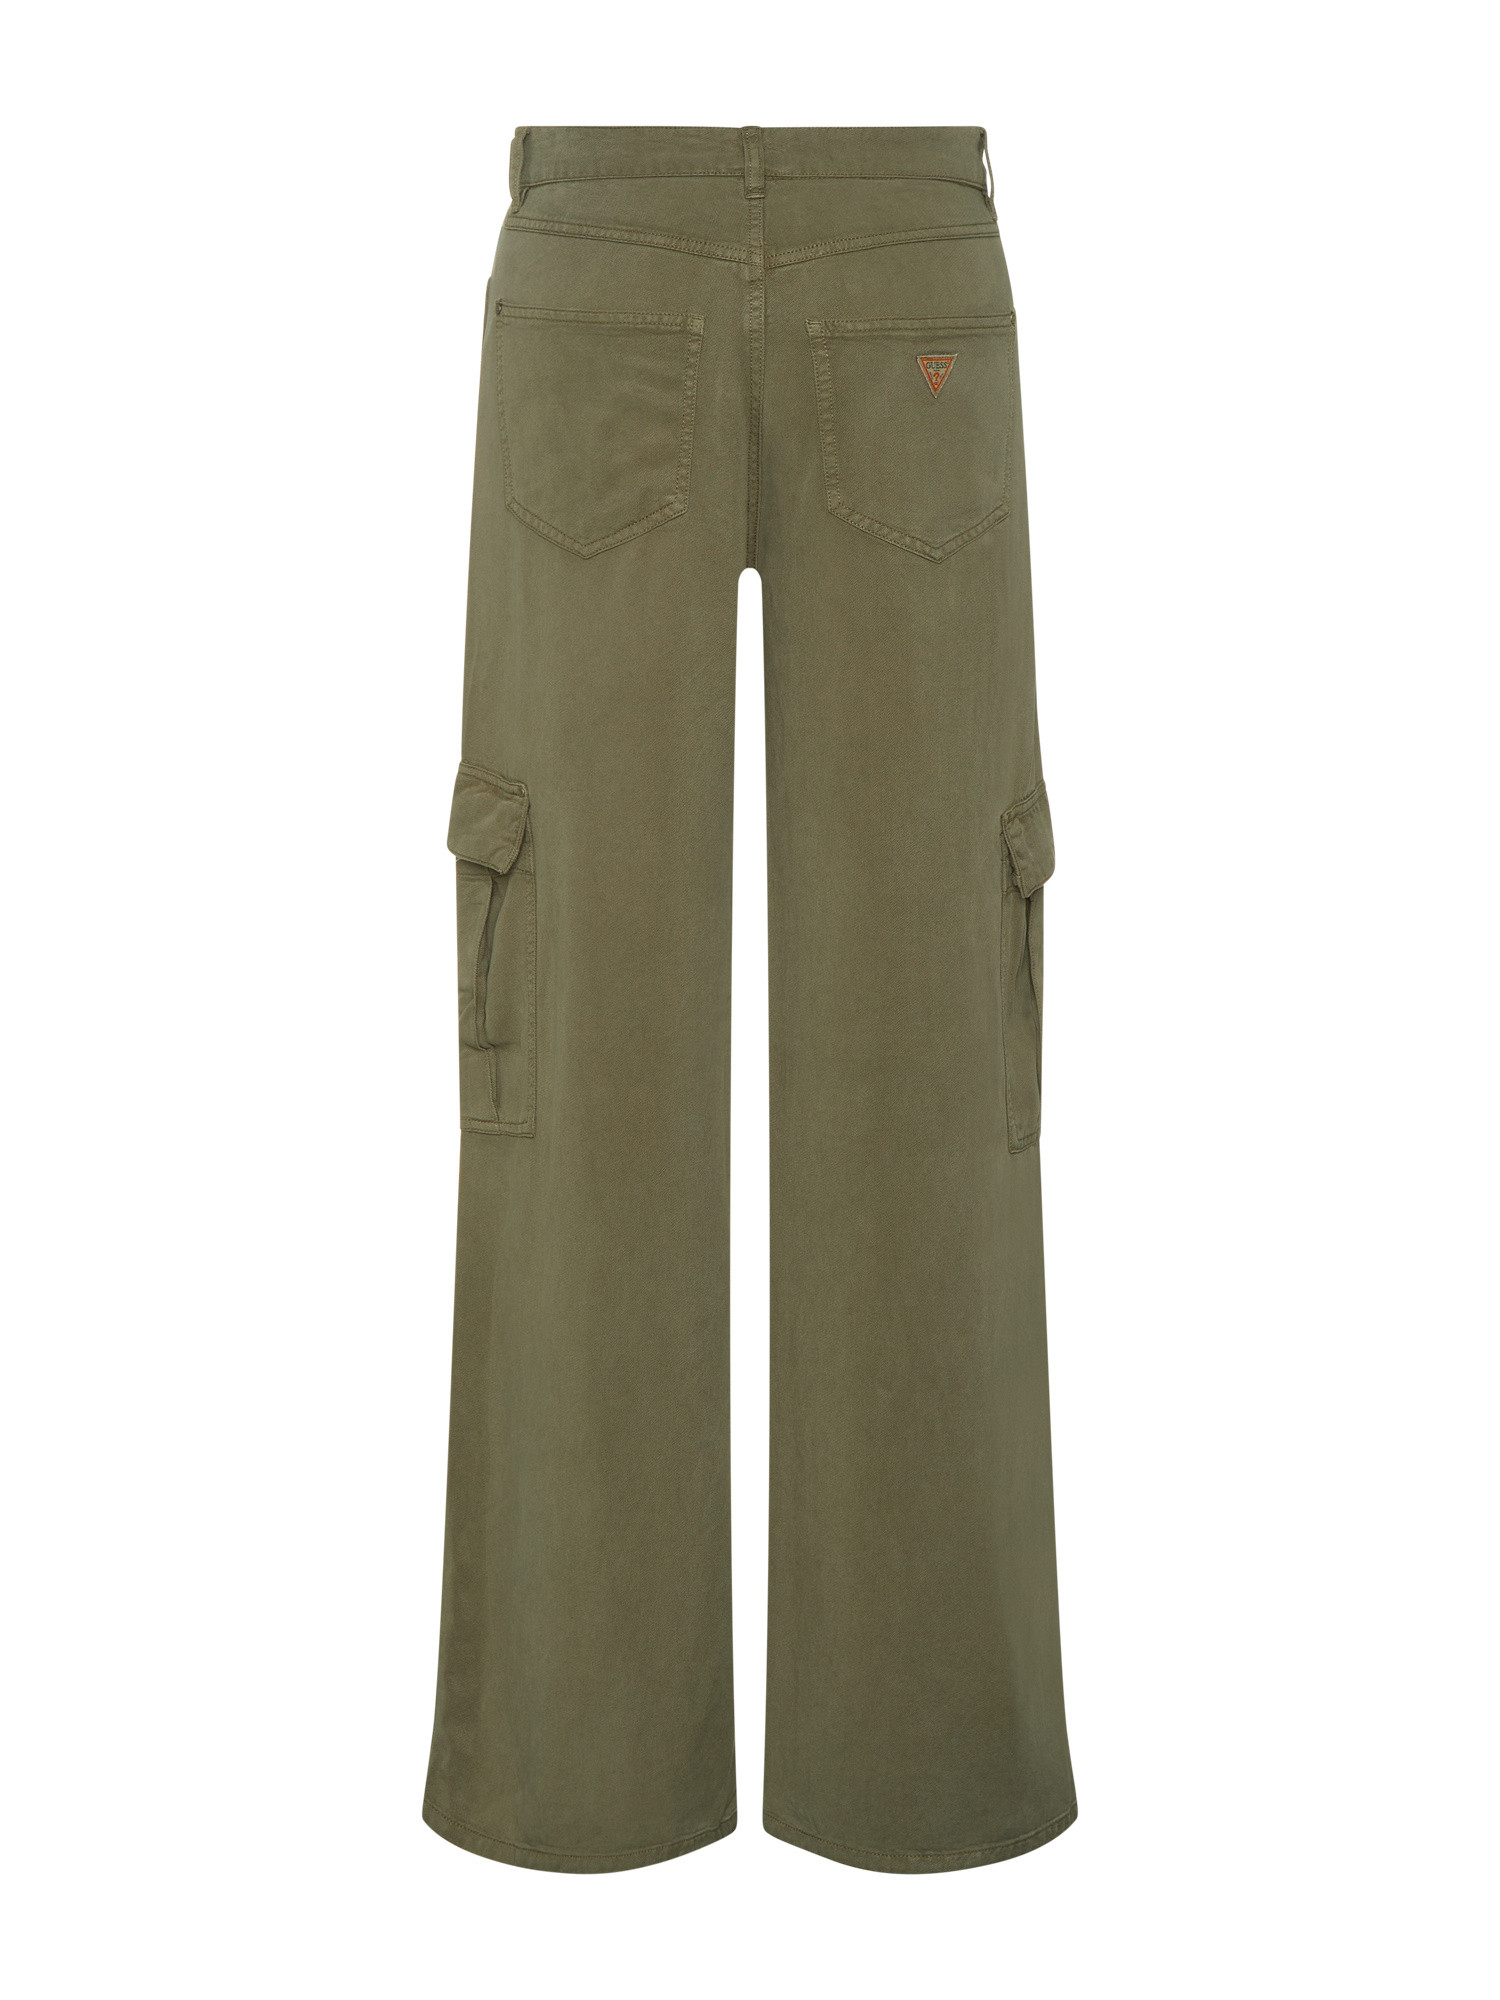 Guess - Cargo trousers, Olive Green, large image number 1